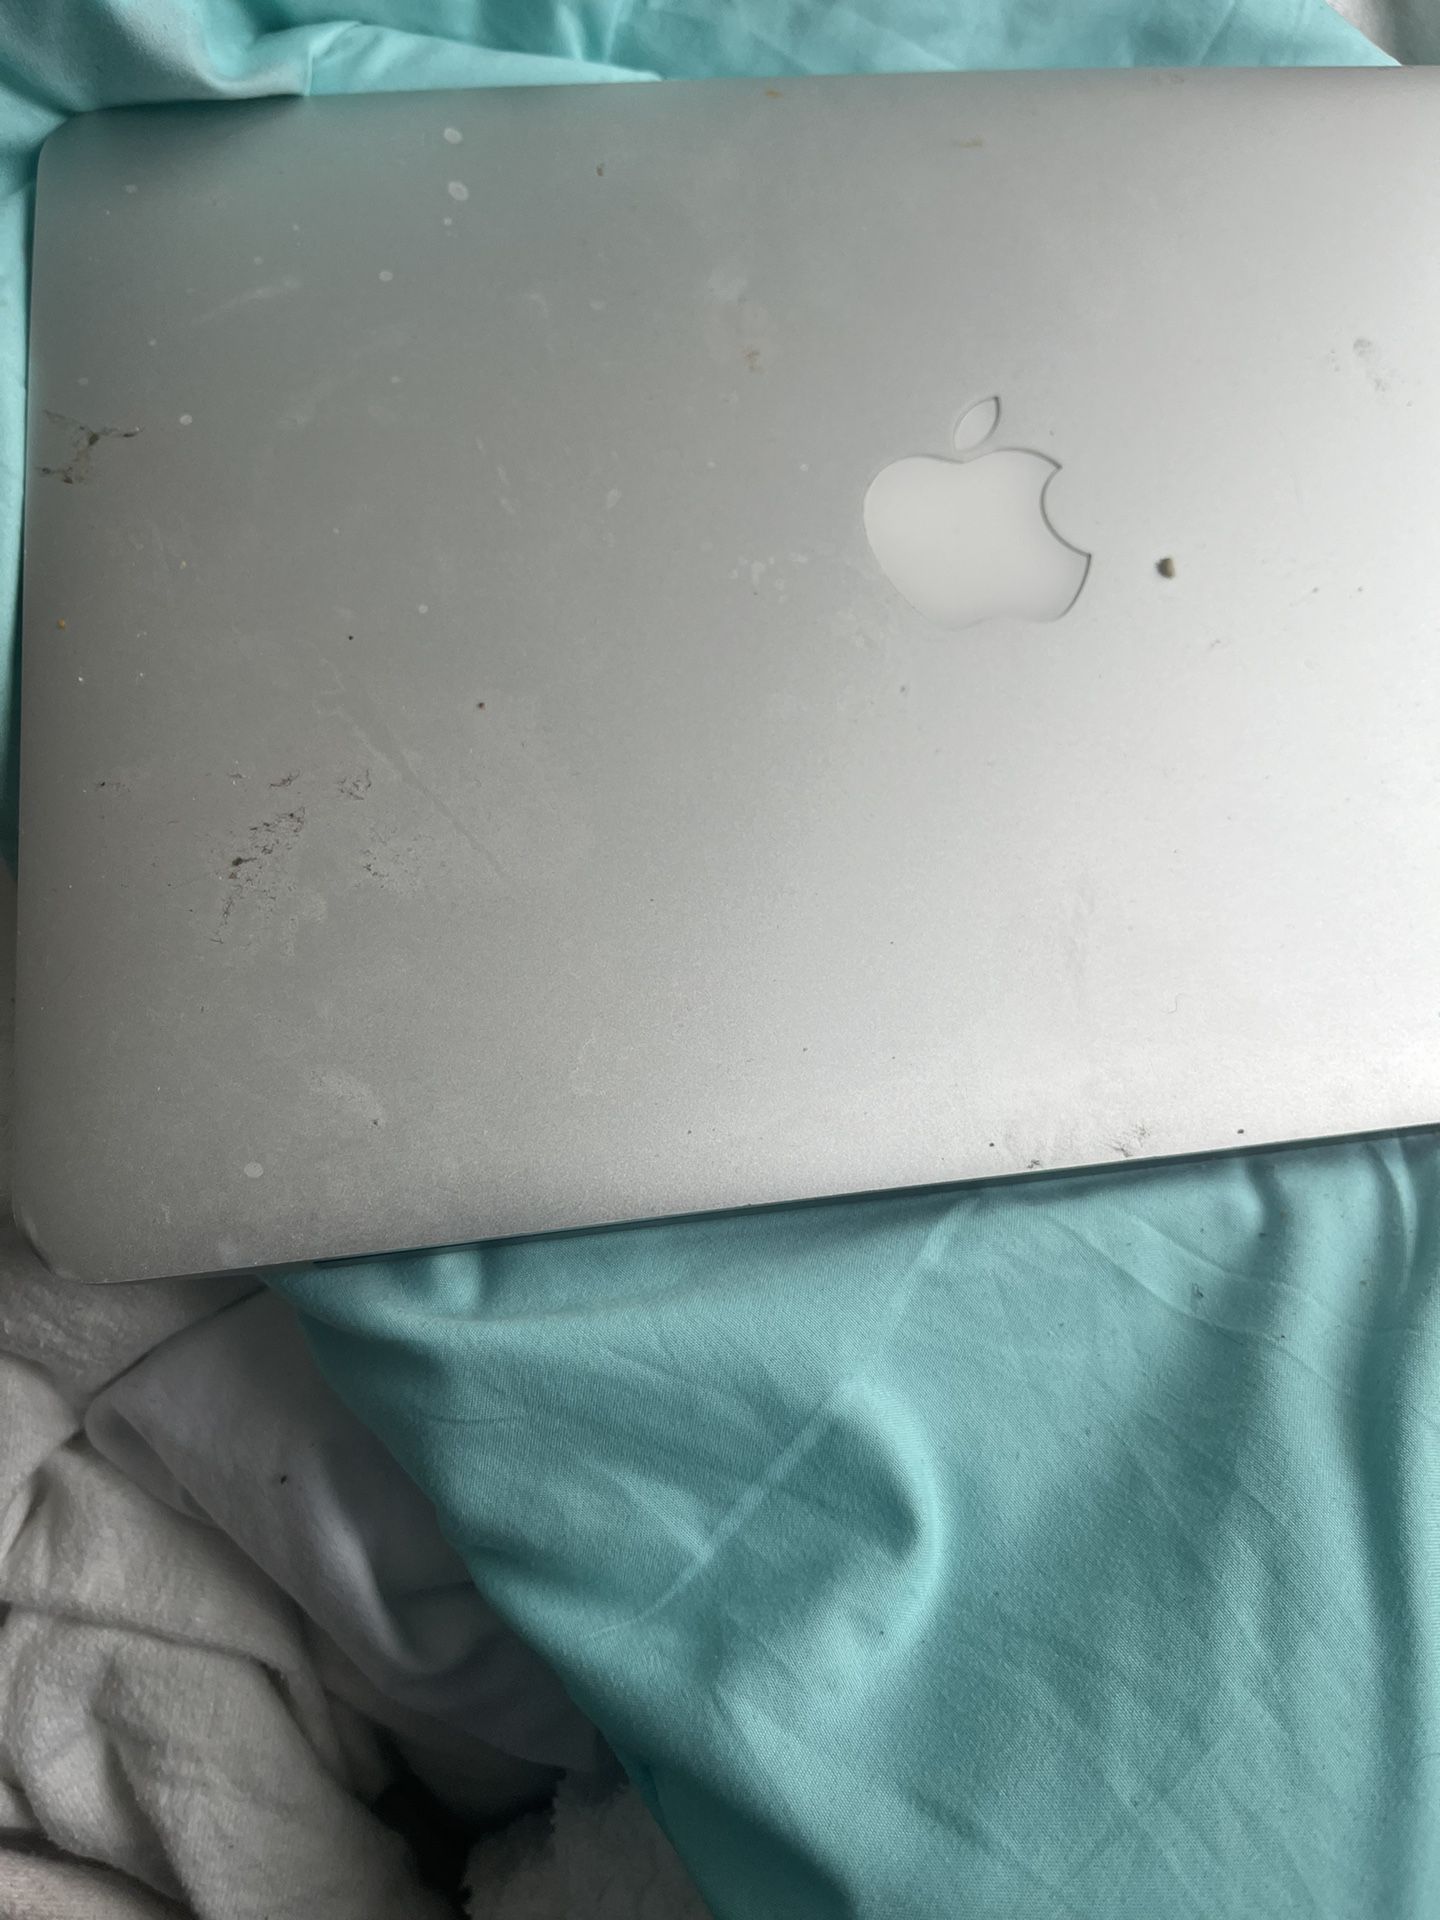 2015 Rentina MacBook Pro 128gb For Parts Unless You Can Fix The Screen